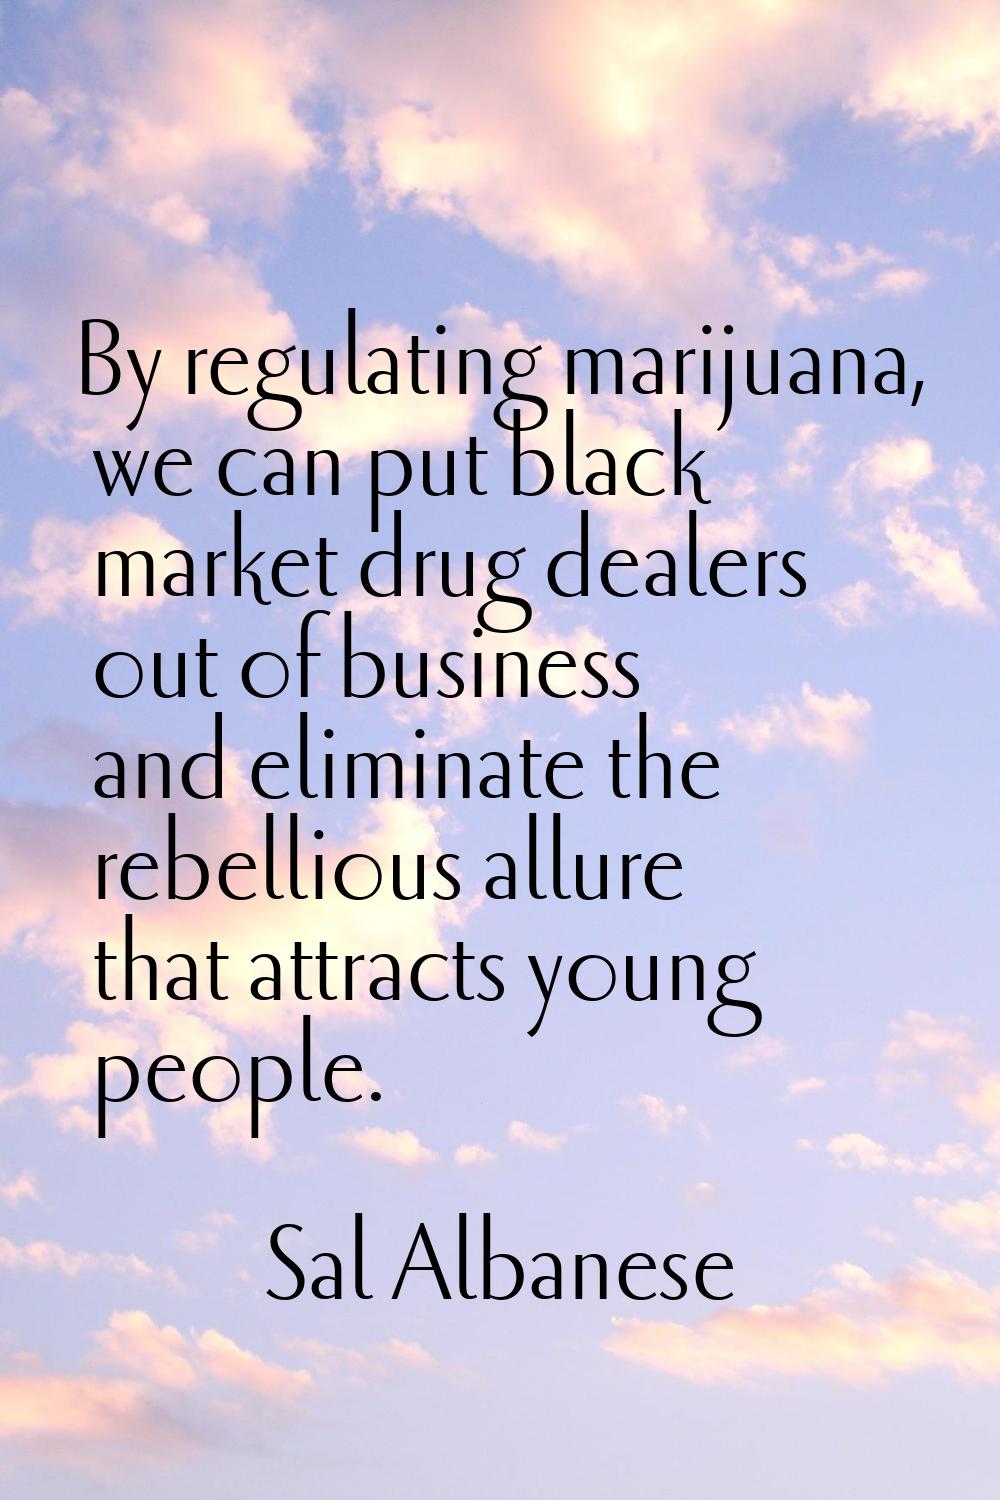 By regulating marijuana, we can put black market drug dealers out of business and eliminate the reb